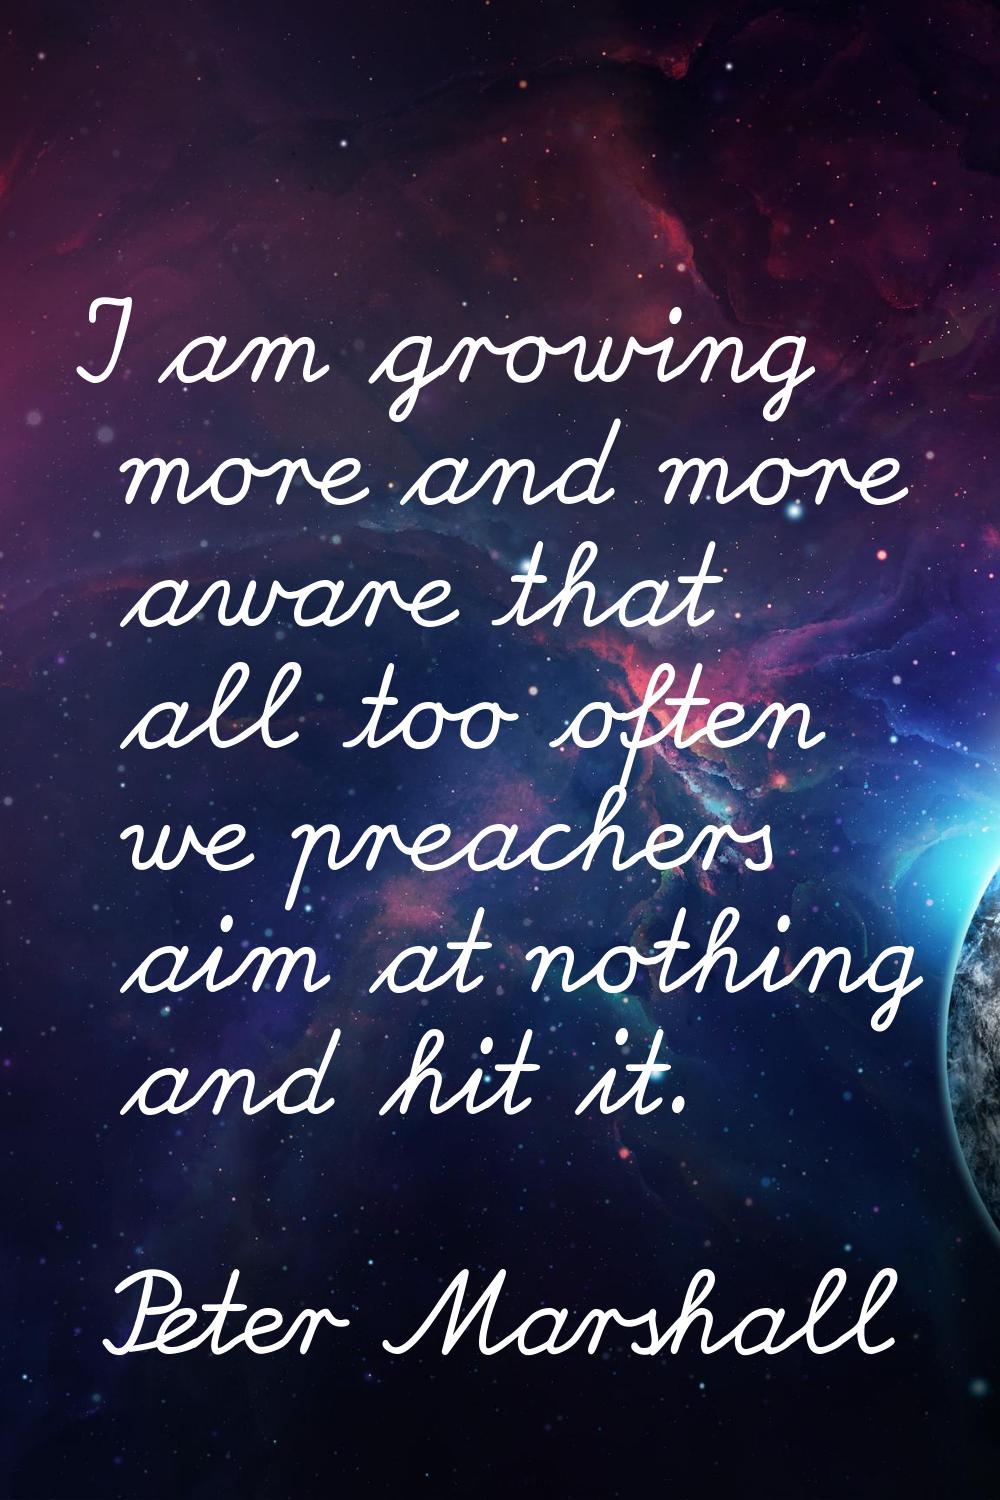 I am growing more and more aware that all too often we preachers aim at nothing and hit it.